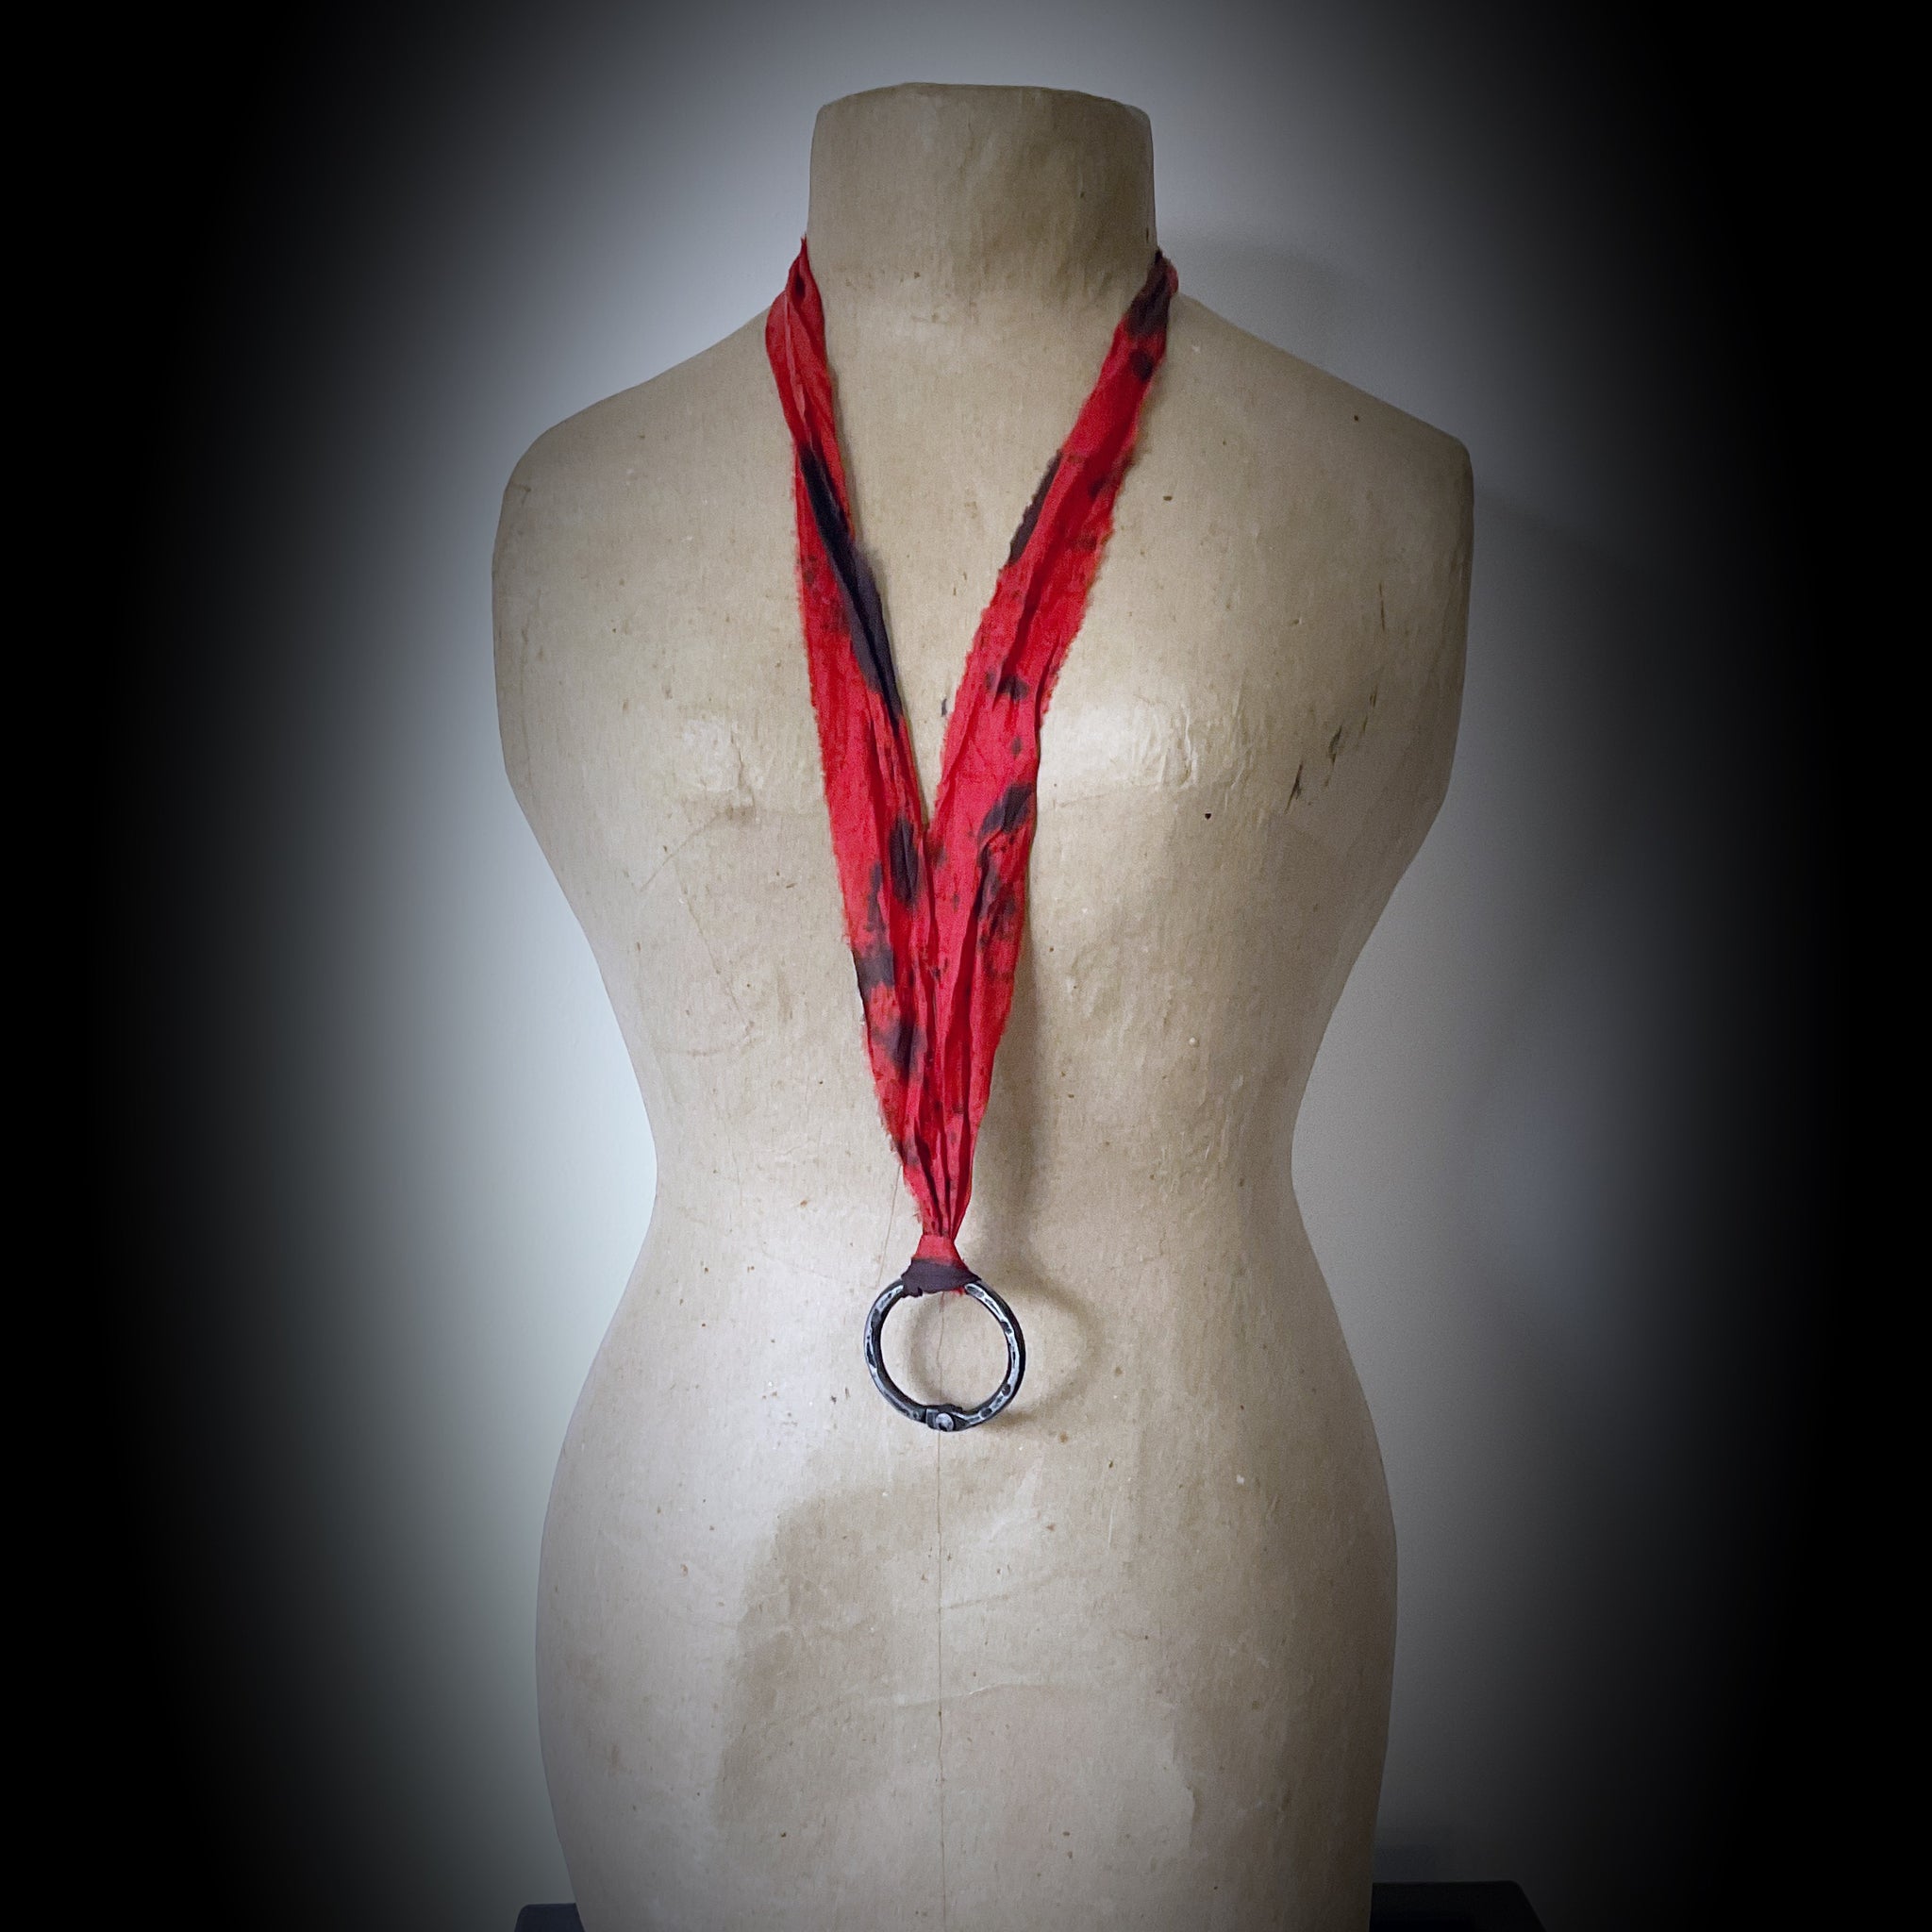 Raw Organic Threads ‘Rags To Riches’ Necklace